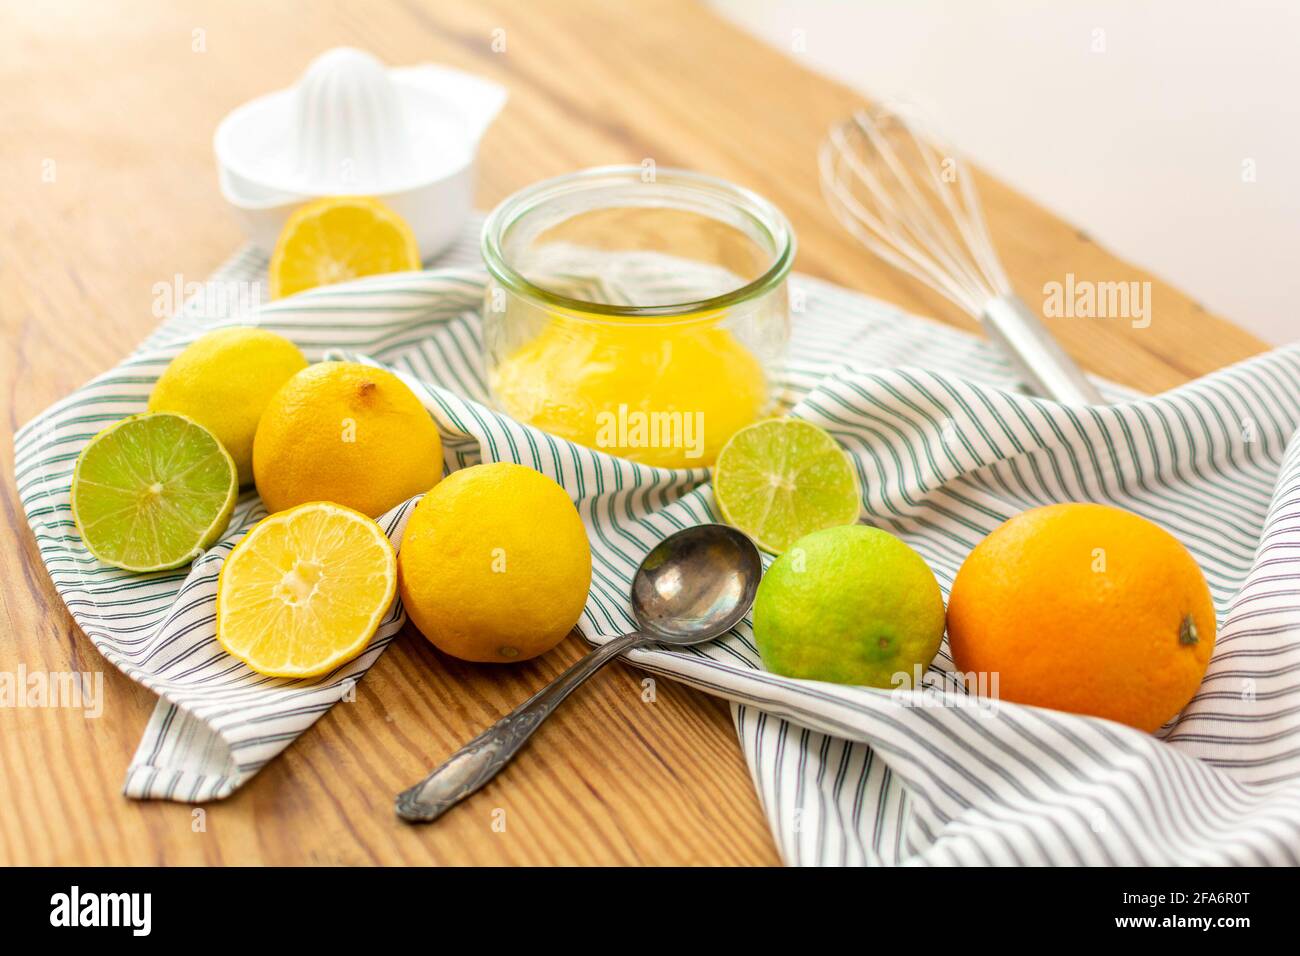 A lot of citrus fruits like lemons, oranges and limes on a wooden table ready to be squeezed for juice or for baking, a glass wtih lemon curd. Stock Photo